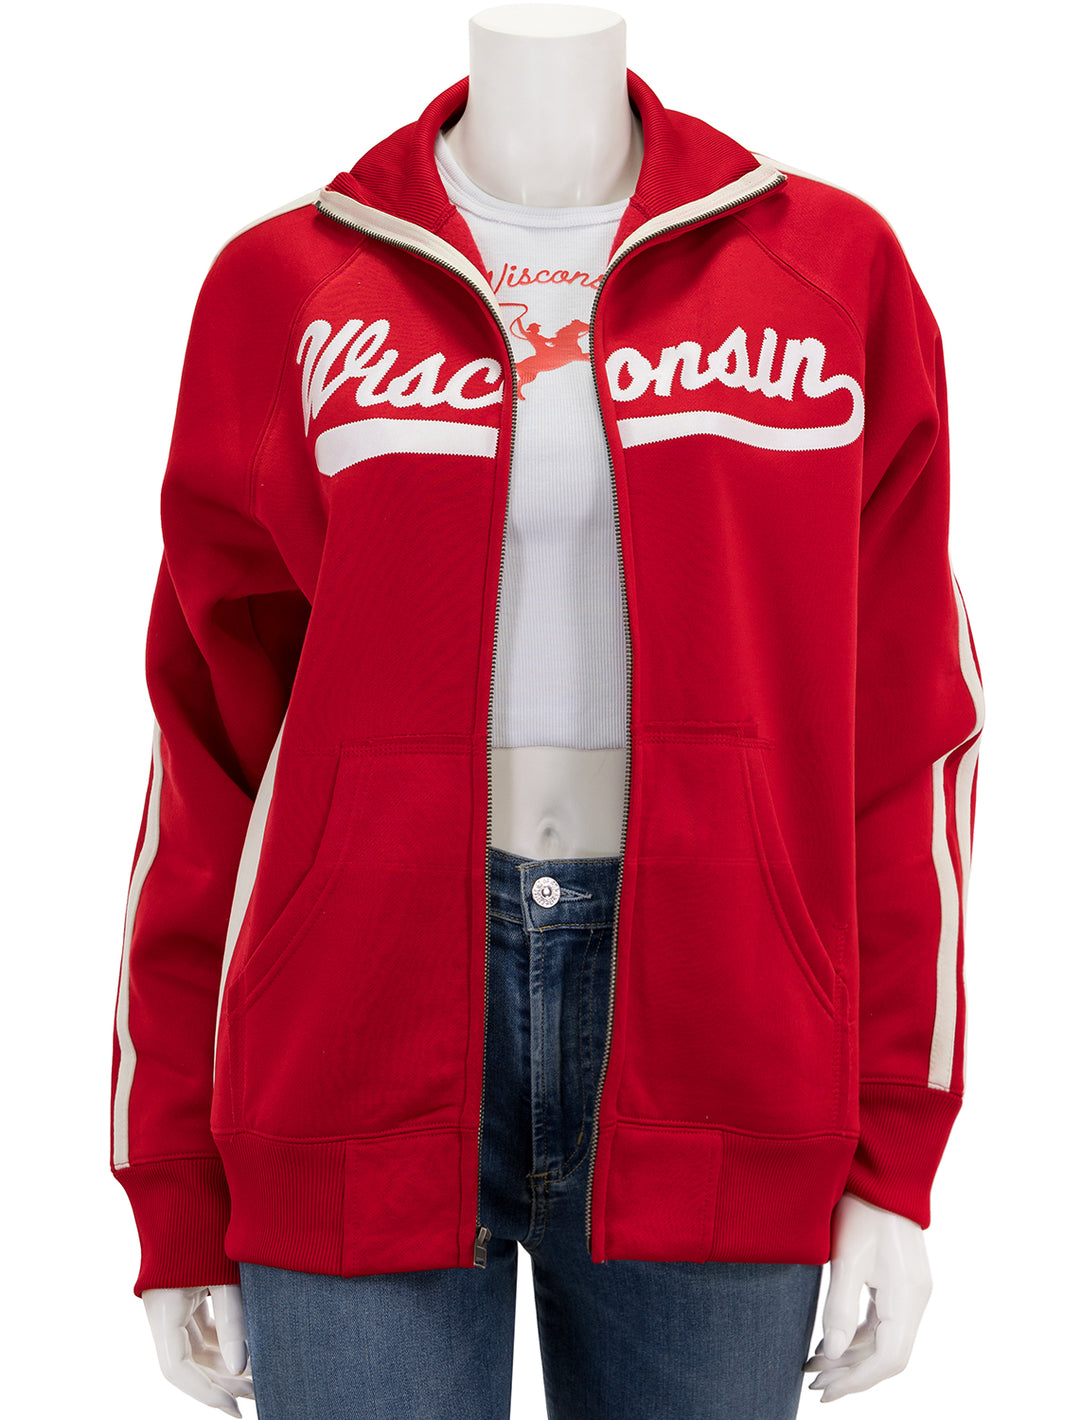 Front view of Recess Apparel's Old School Track Jacket in Red, unzipped.